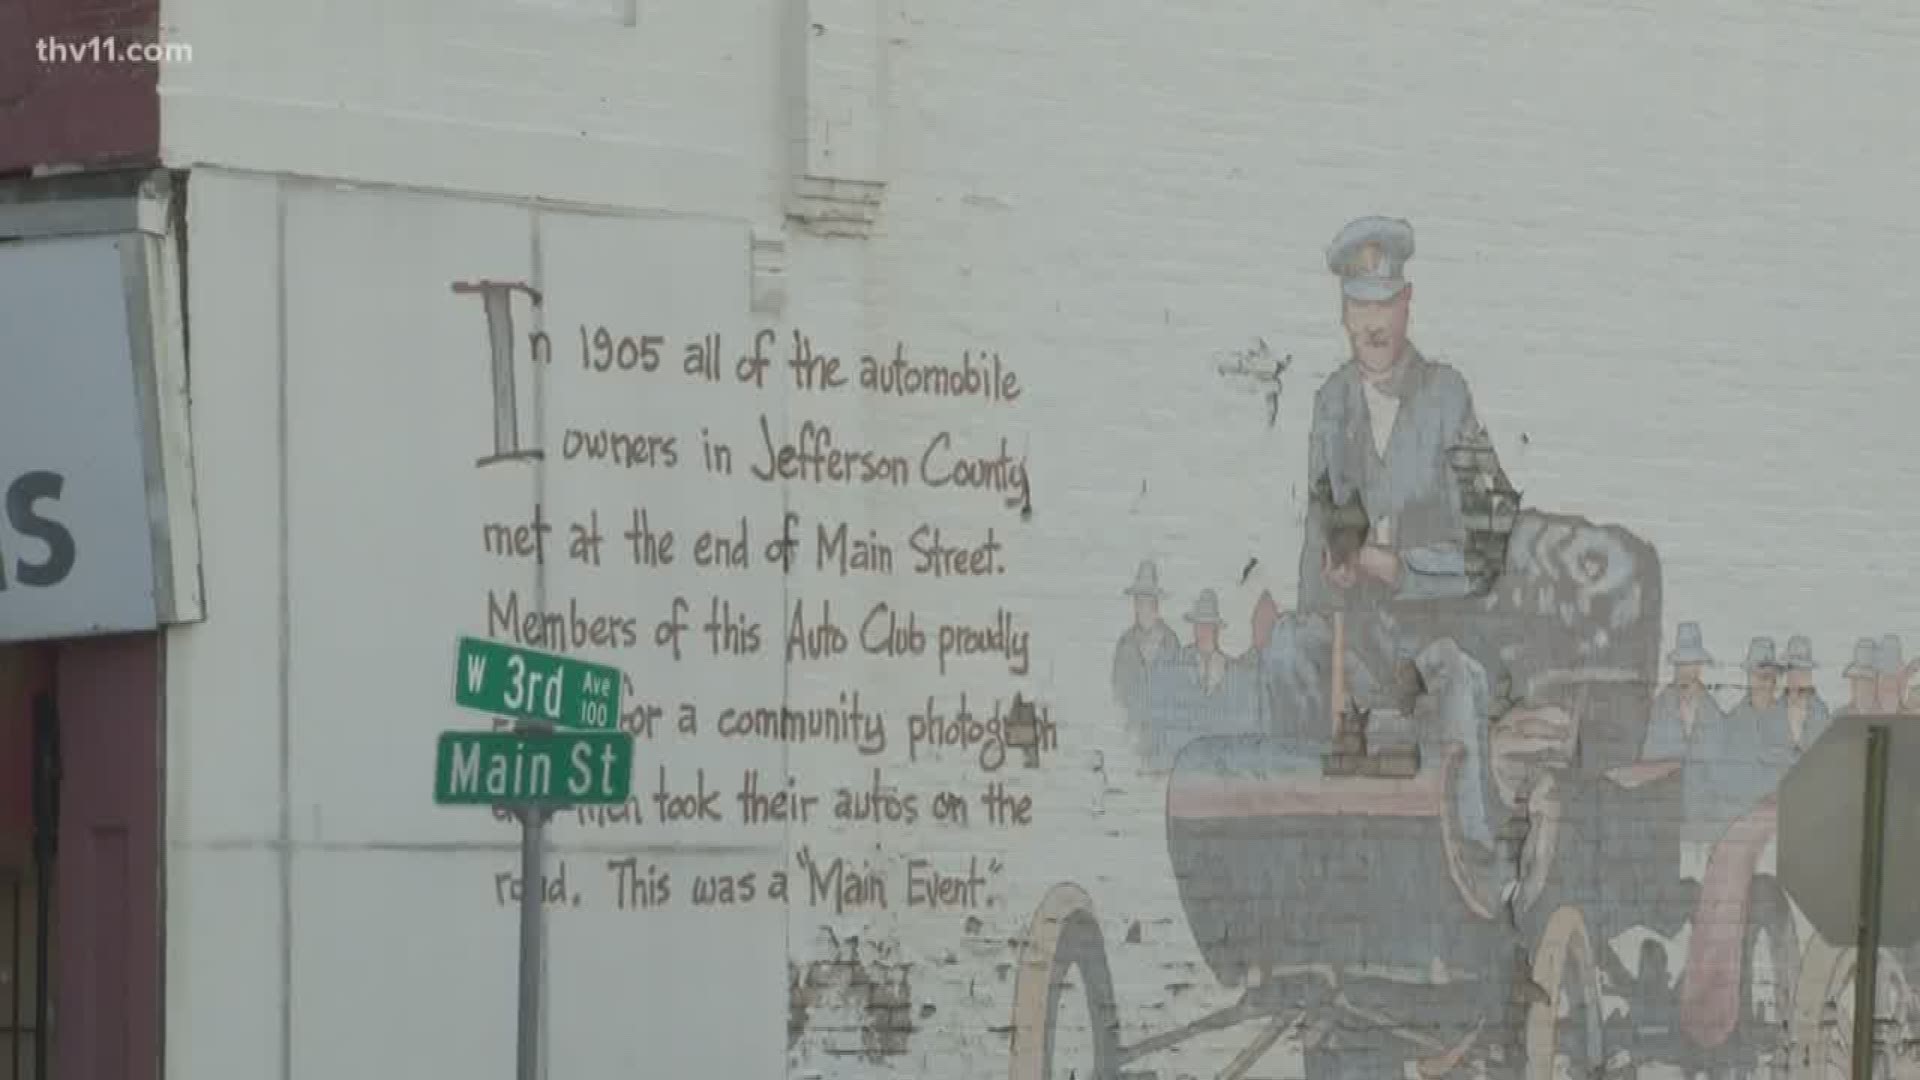 People in Pine Bluff are continuing to work to revitalize their city.